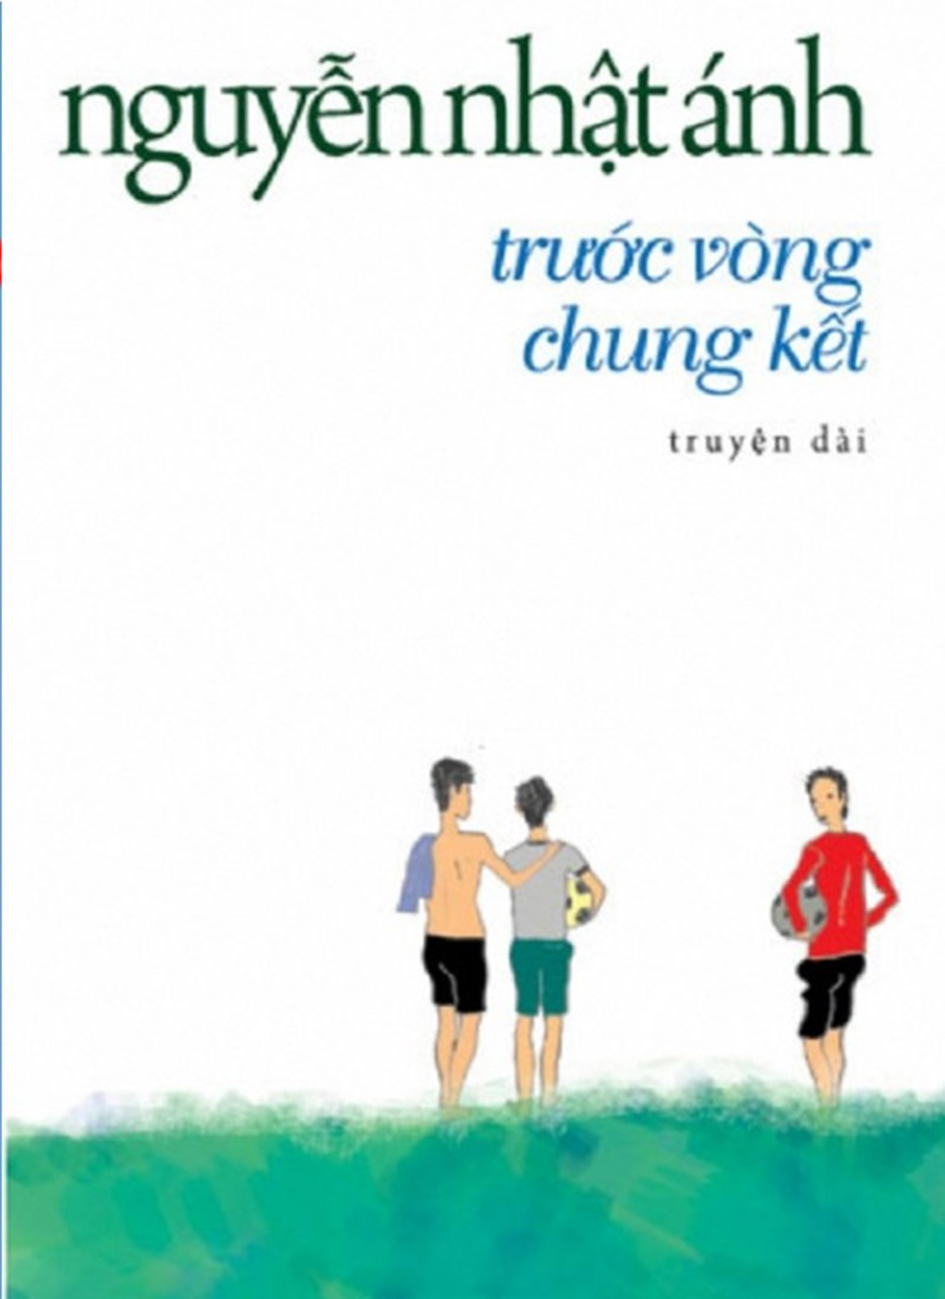 truoc vong chung ket